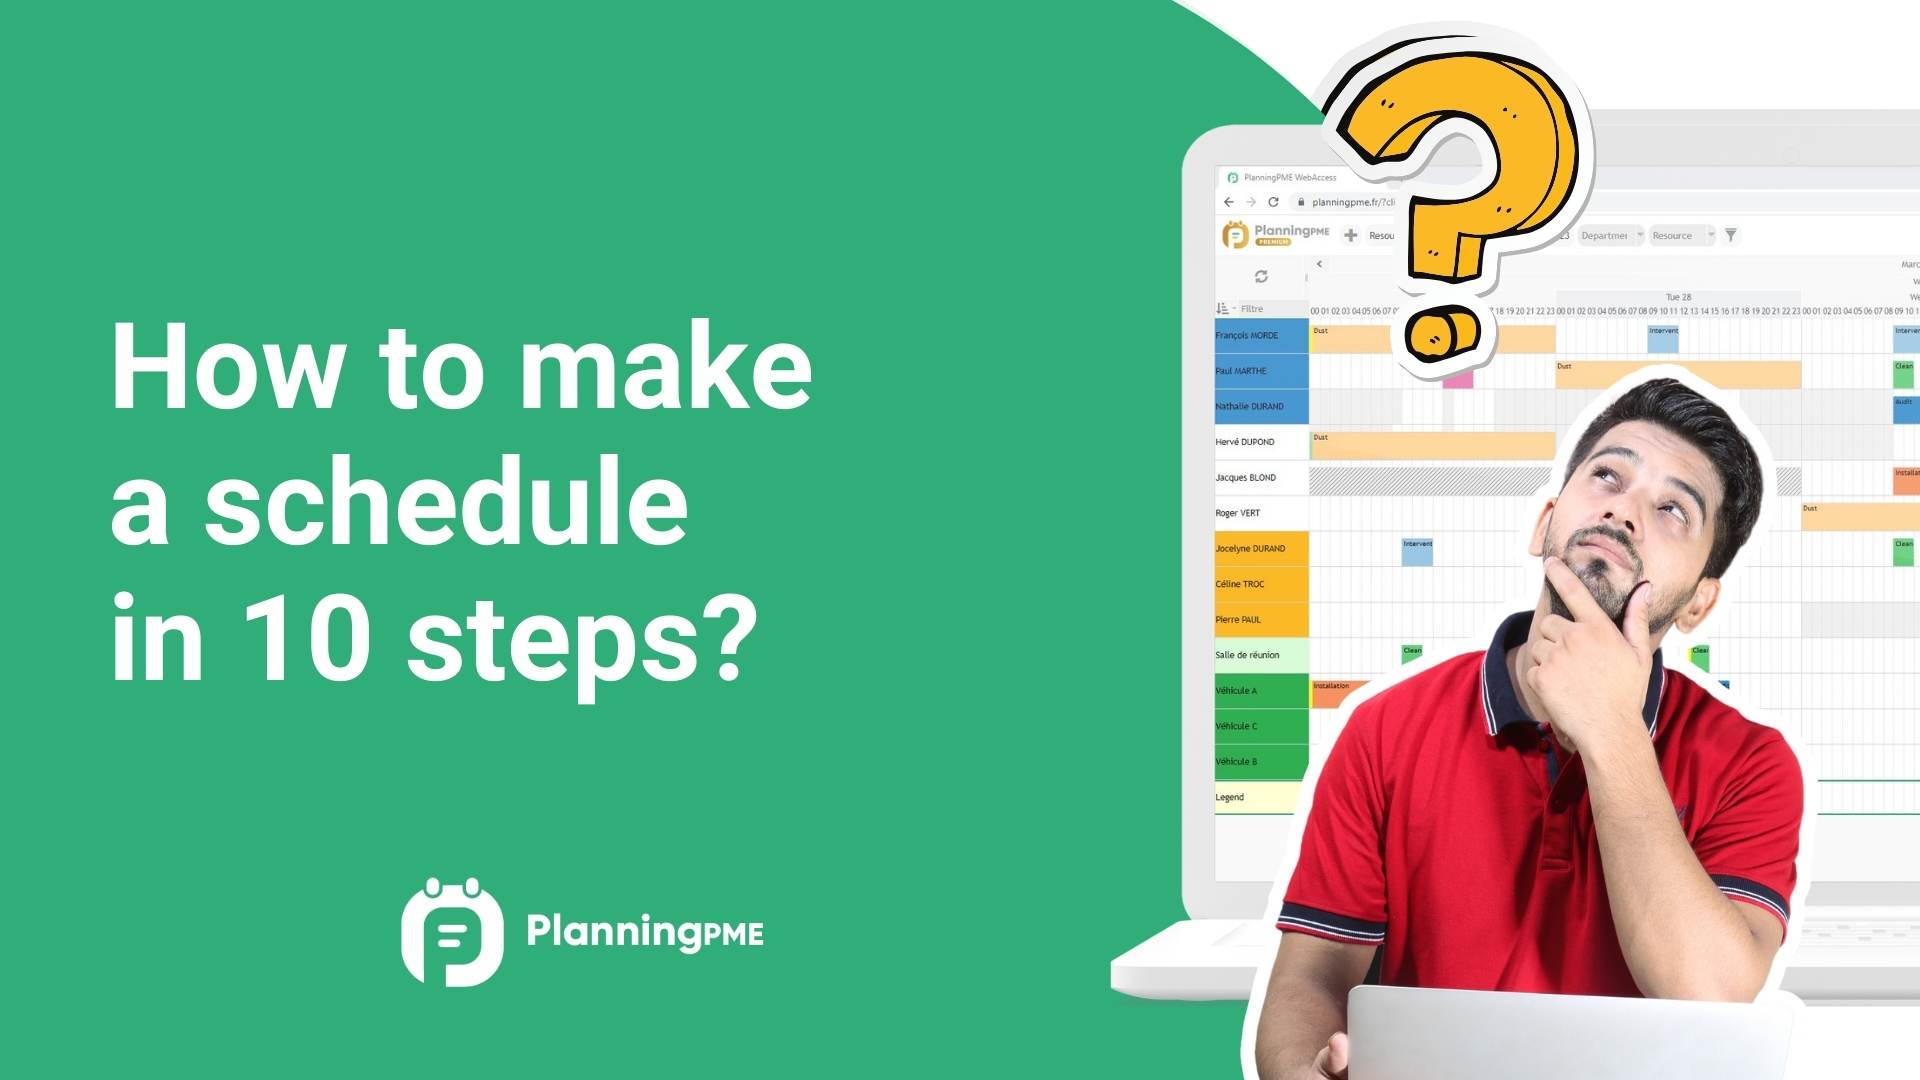 How to create a schedule in 10 steps